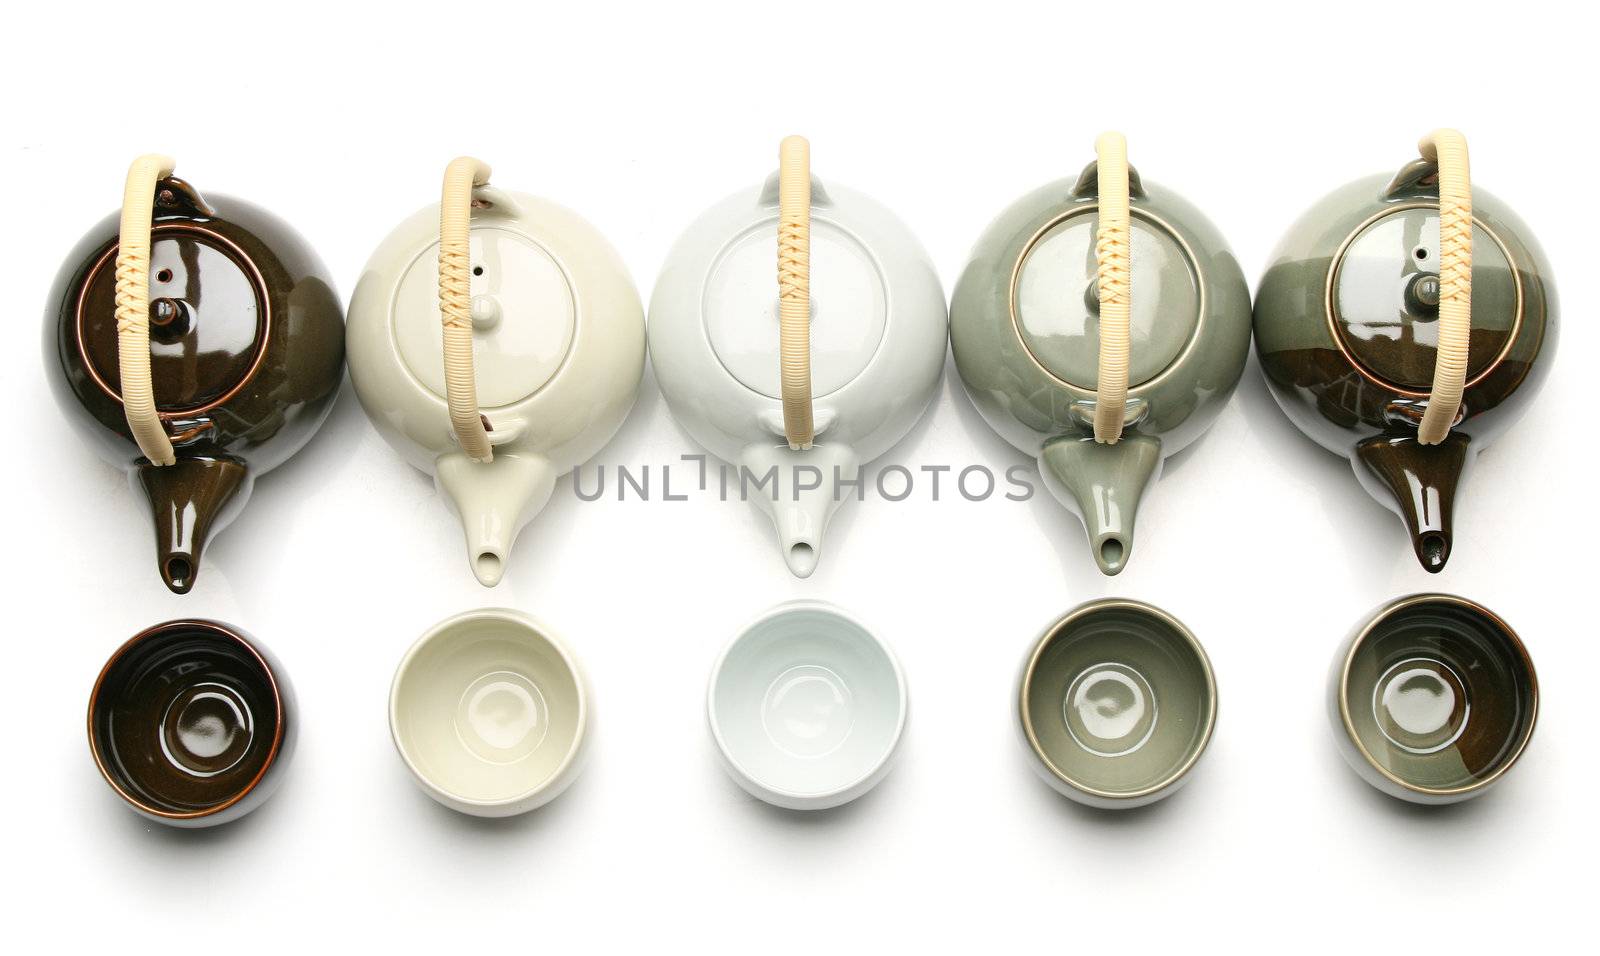 Various teapots and tea cups over white background